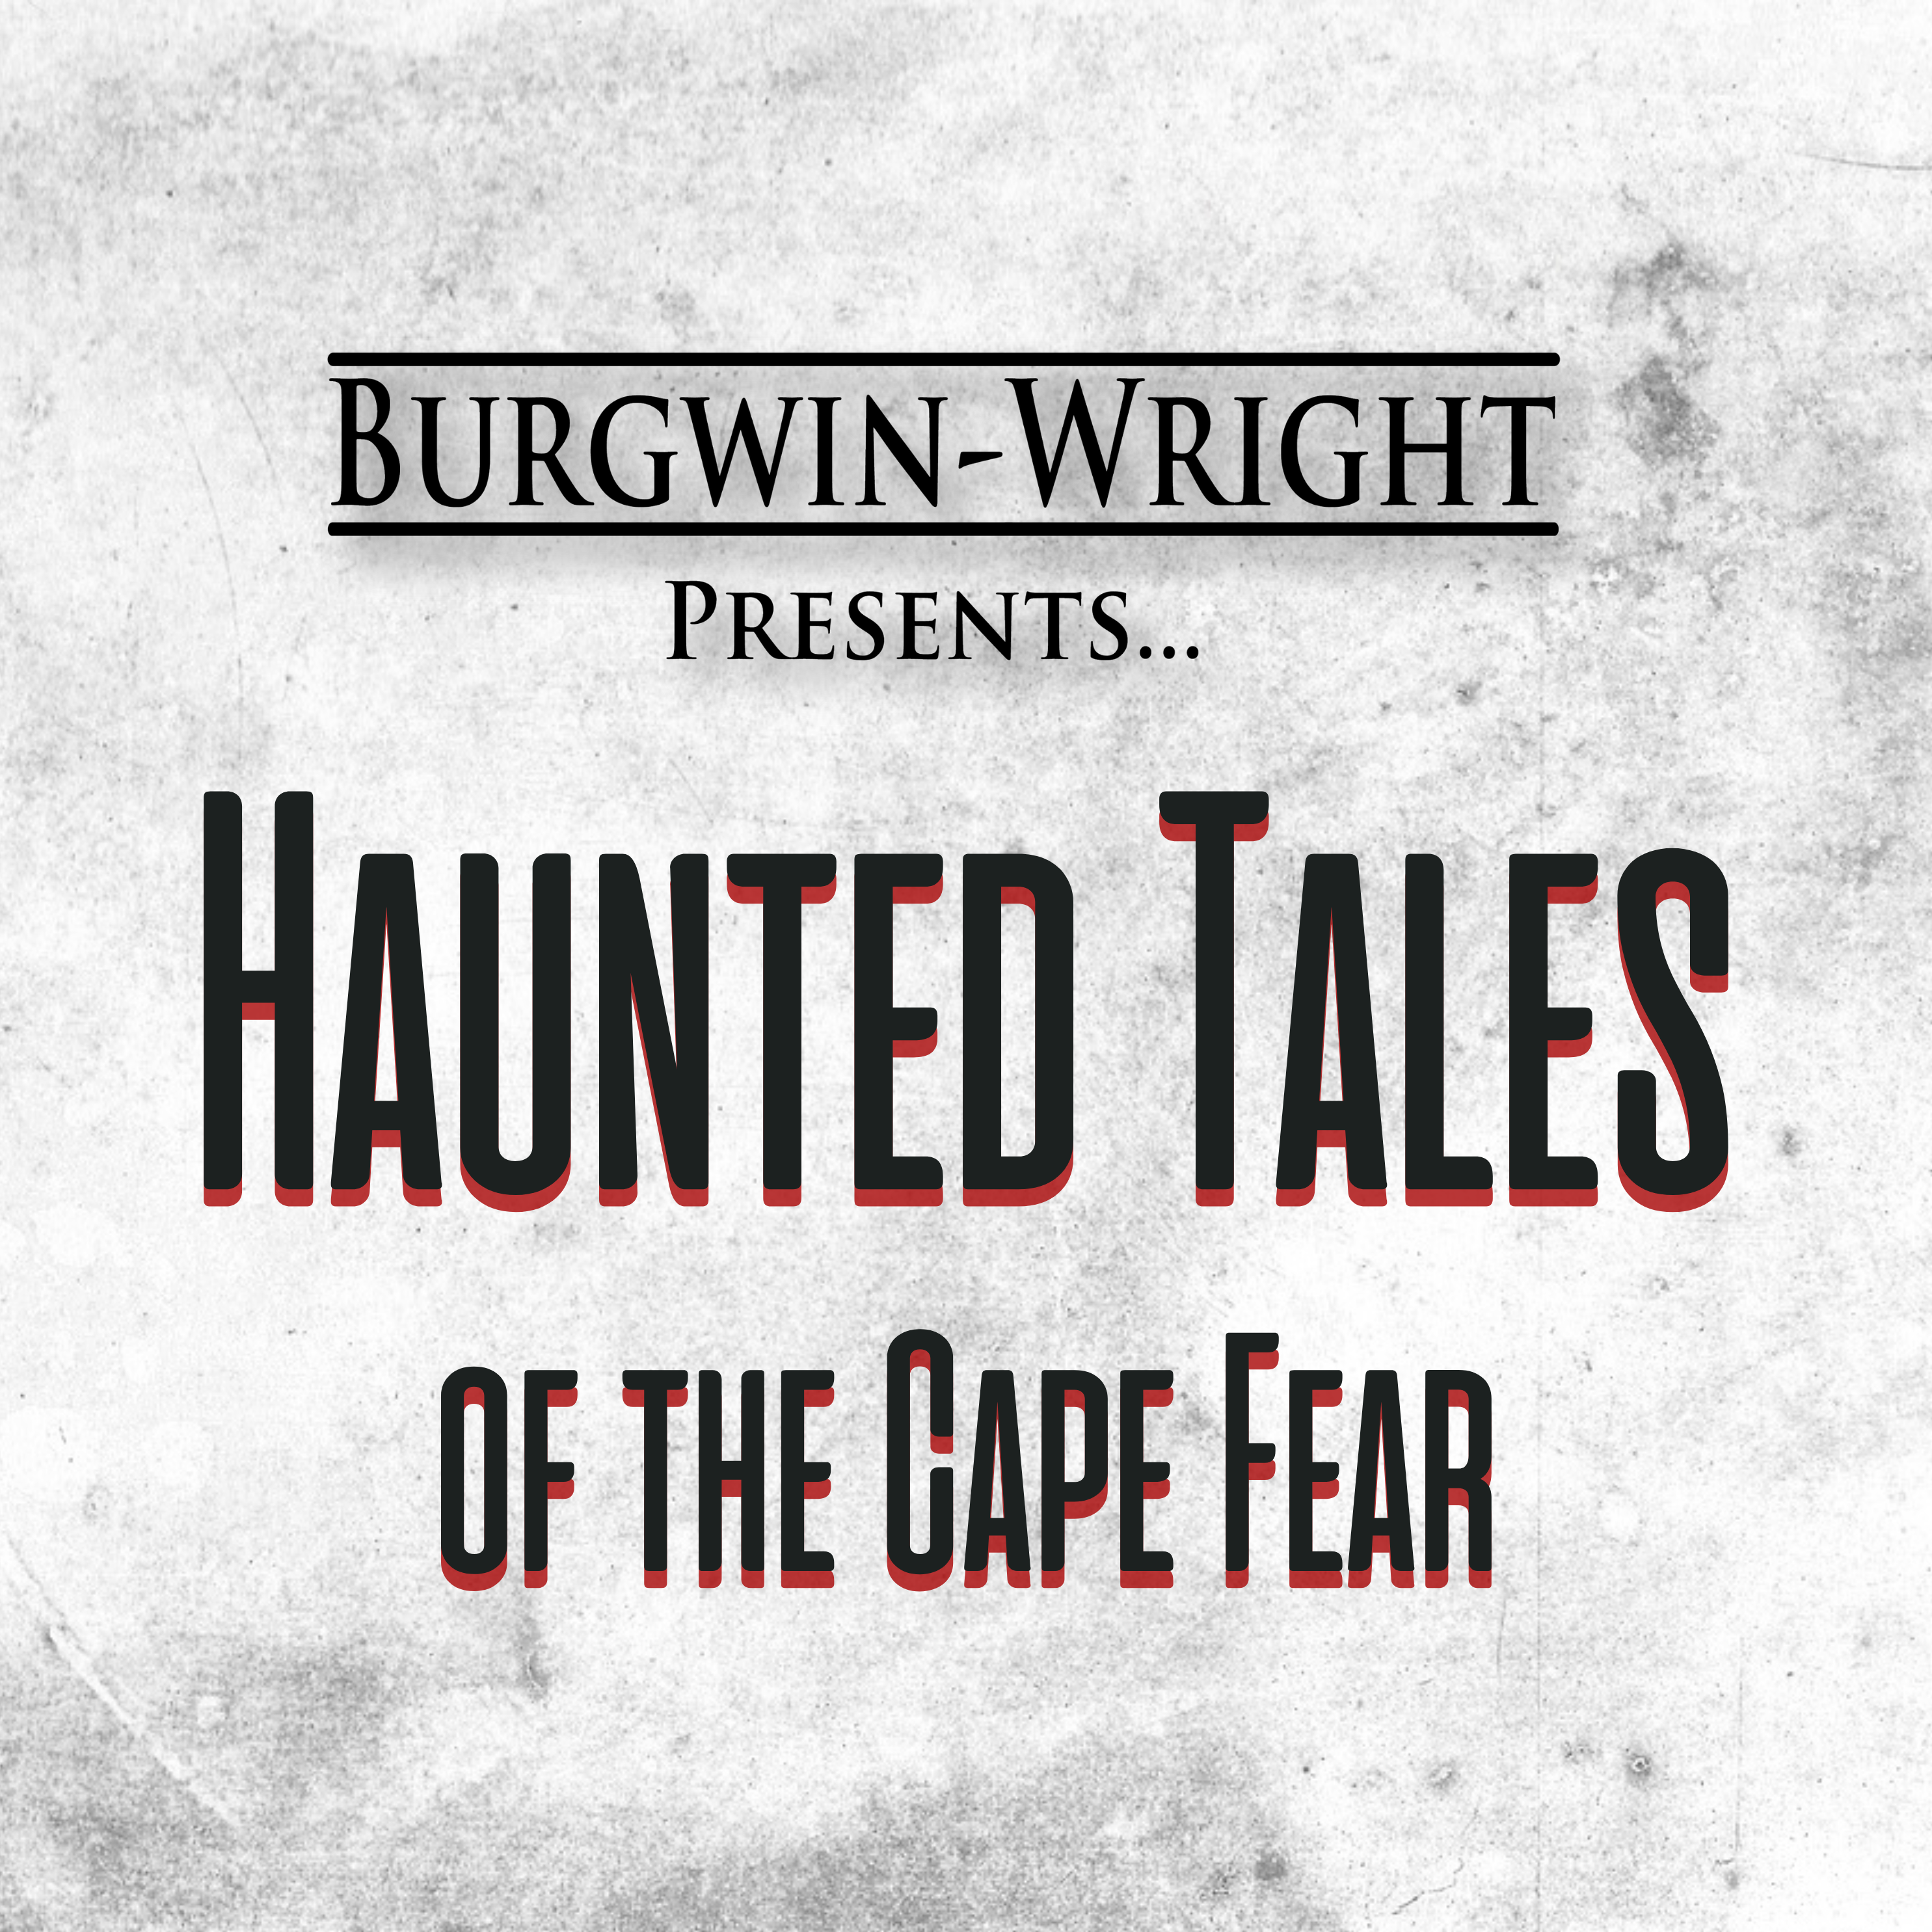 Haunted Tales of the Cape Fear: Brunswick Town